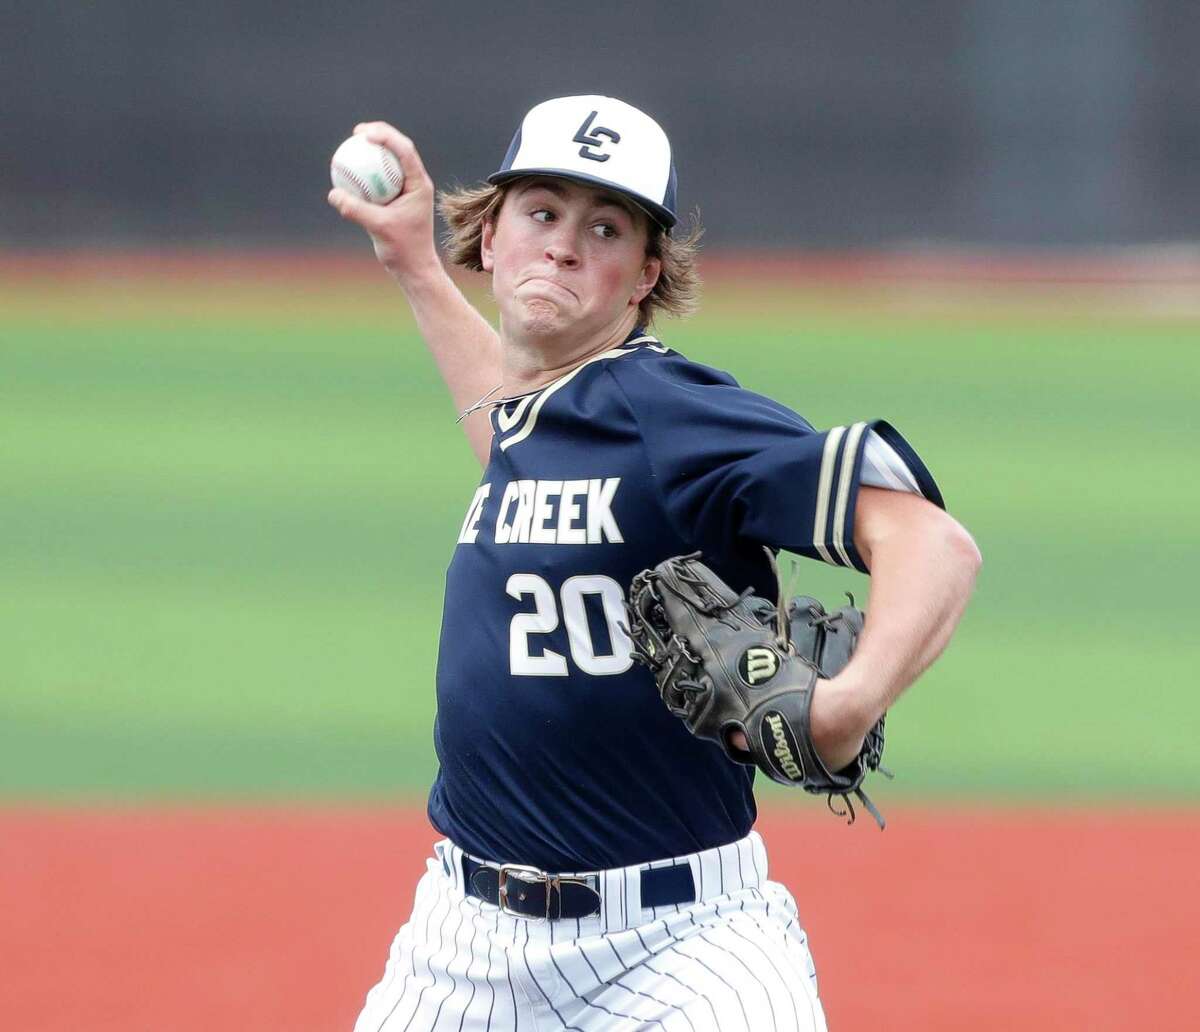 Lake Creek starting pitcher Jack Haag (20) throws in the first inning of a high school baseball game at Grand Oaks High School, Friday, March 11, 2022, in Spring.